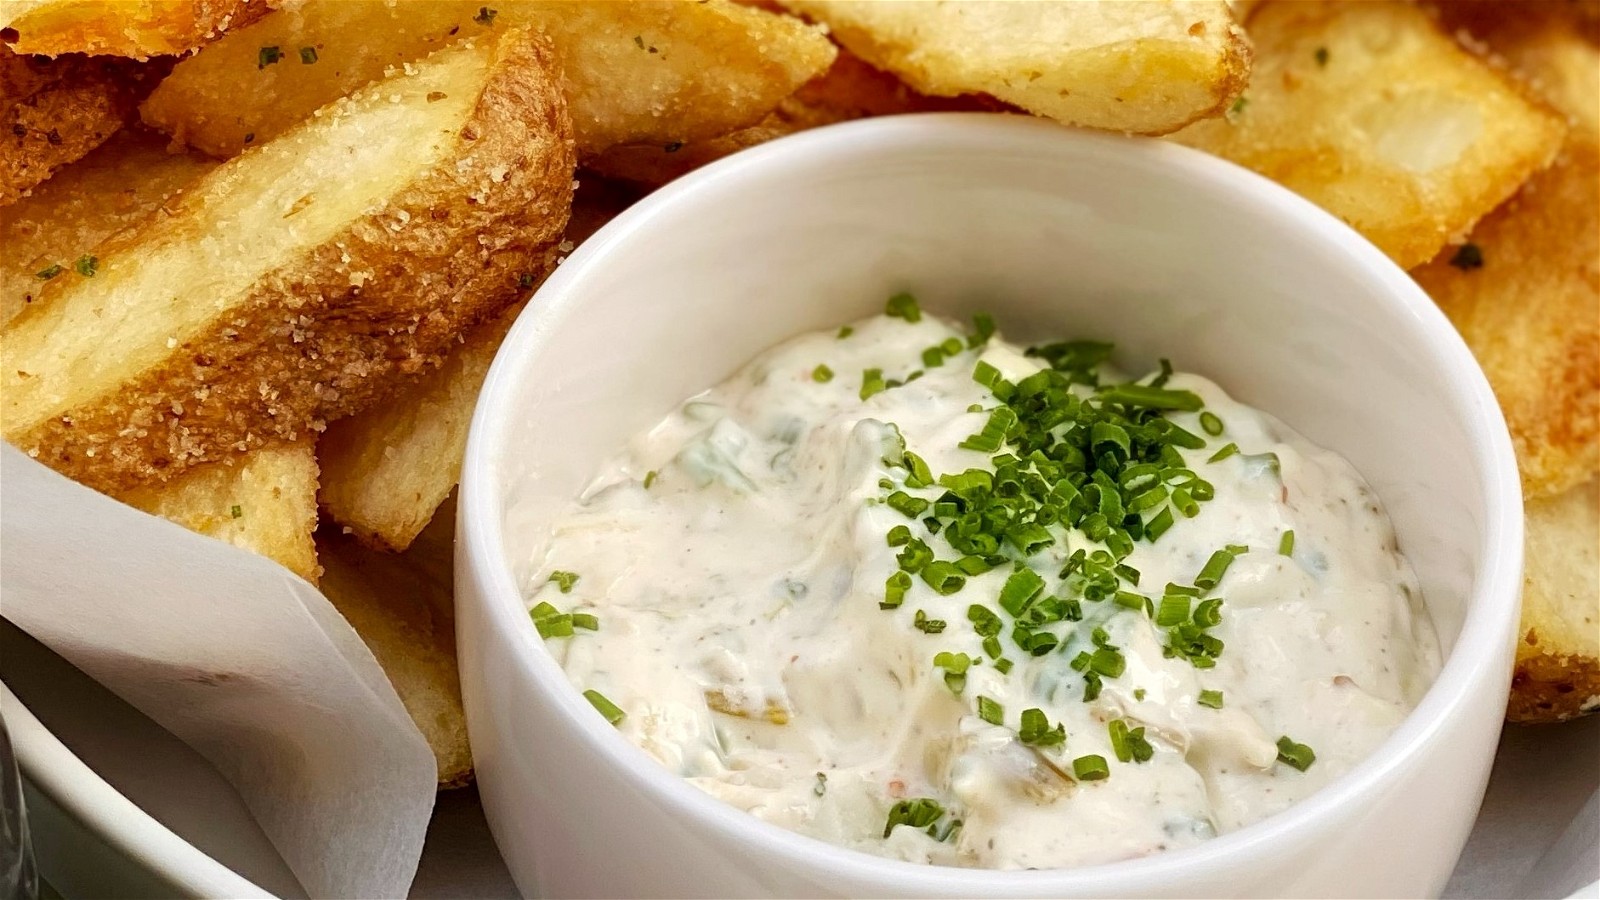 Image of Sour Cream and Onion Dip